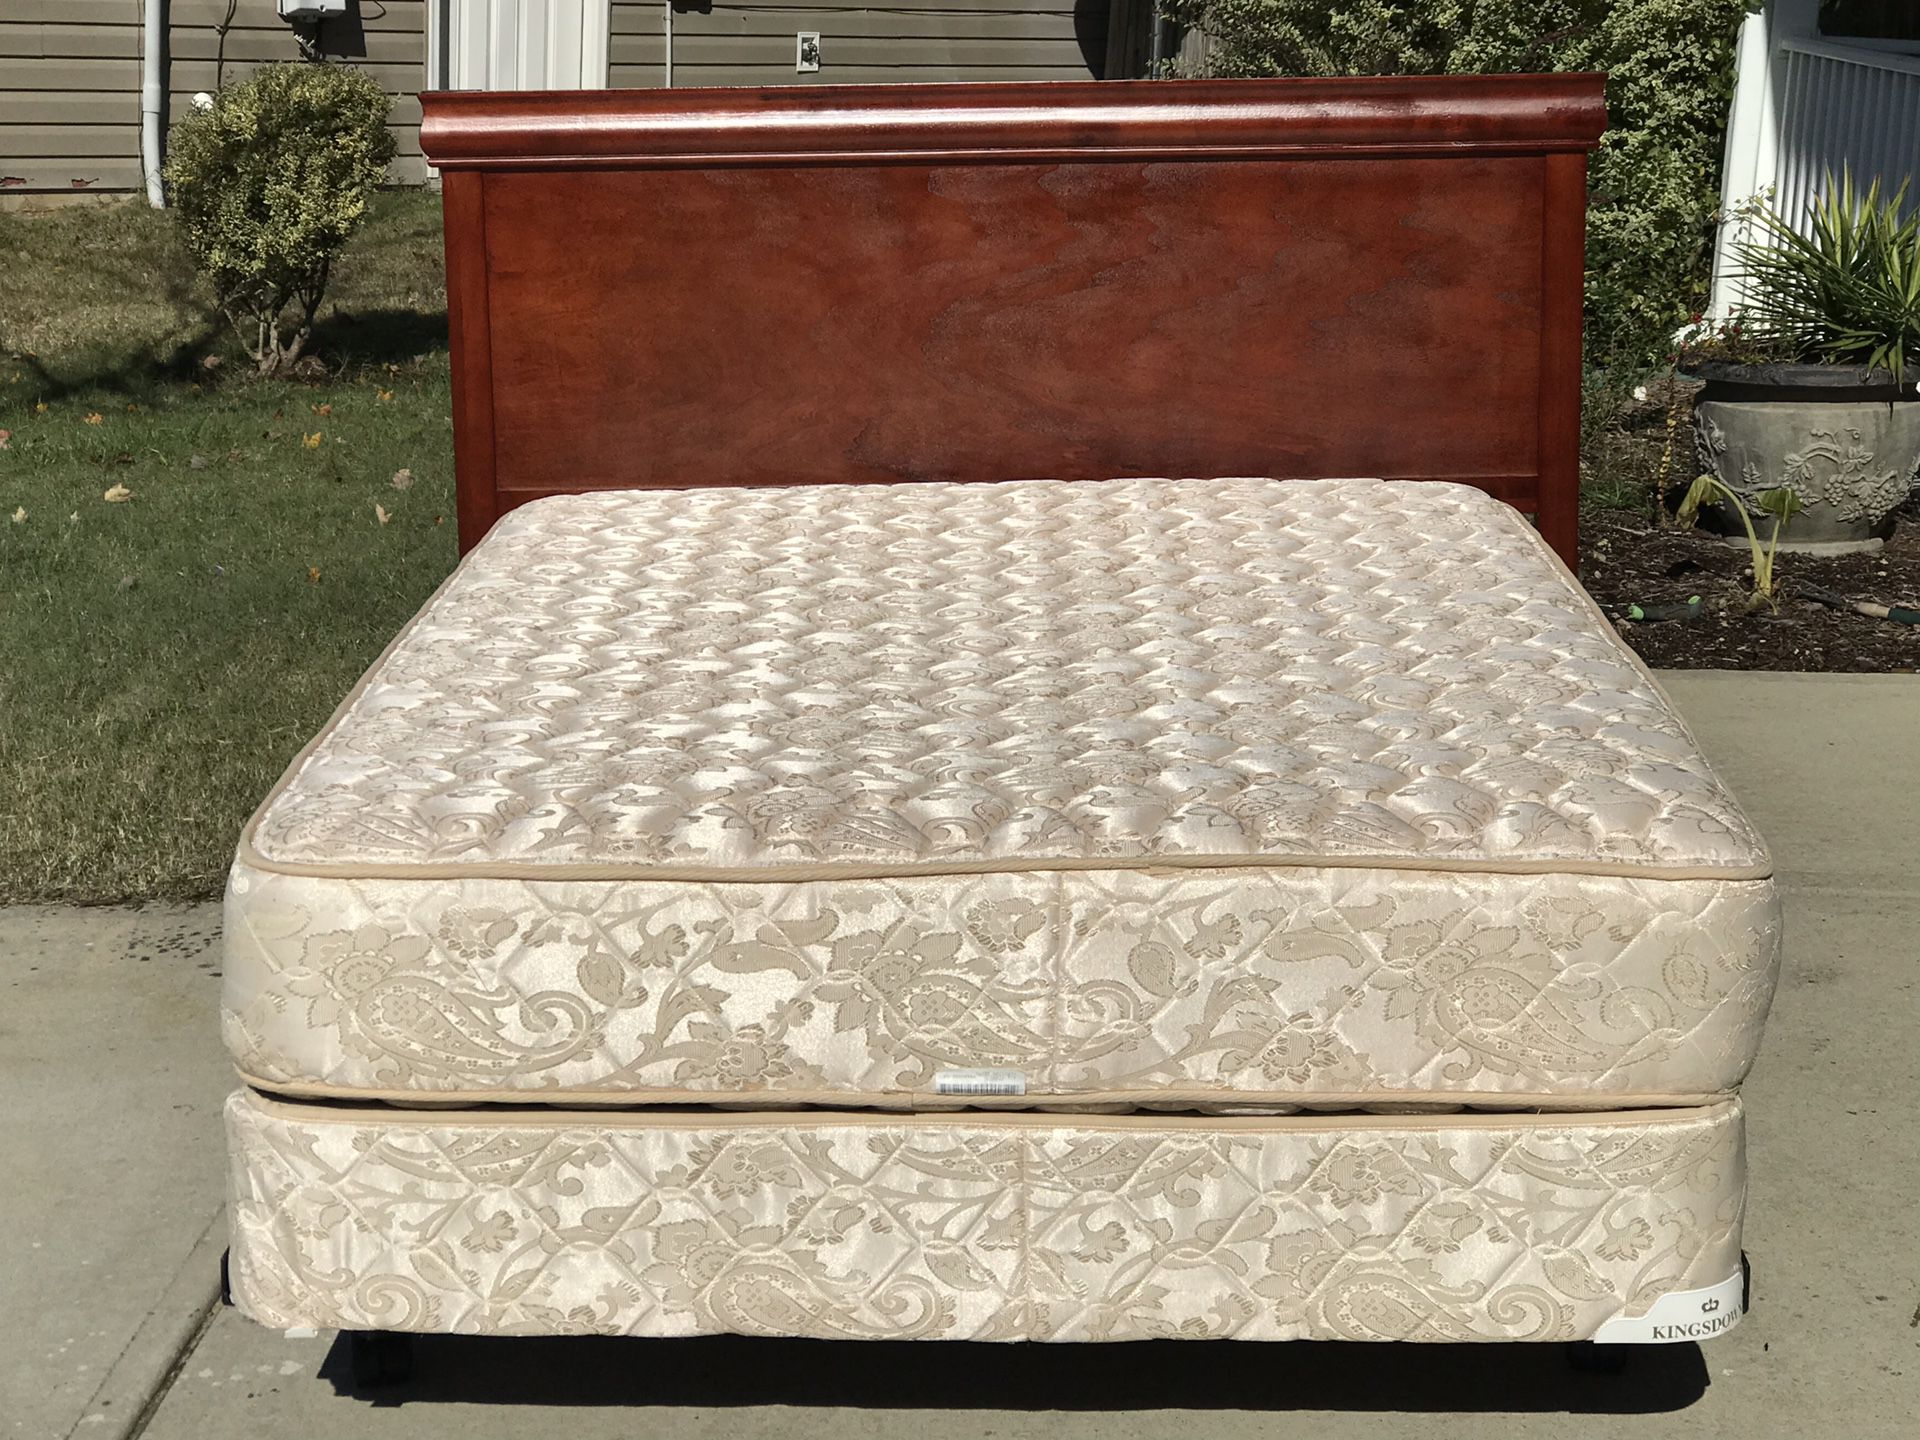 Full Bed with Headboard, Mattress, boxspring and Rail. Great condition. Delivery available for a small fee. Hablar Espanol